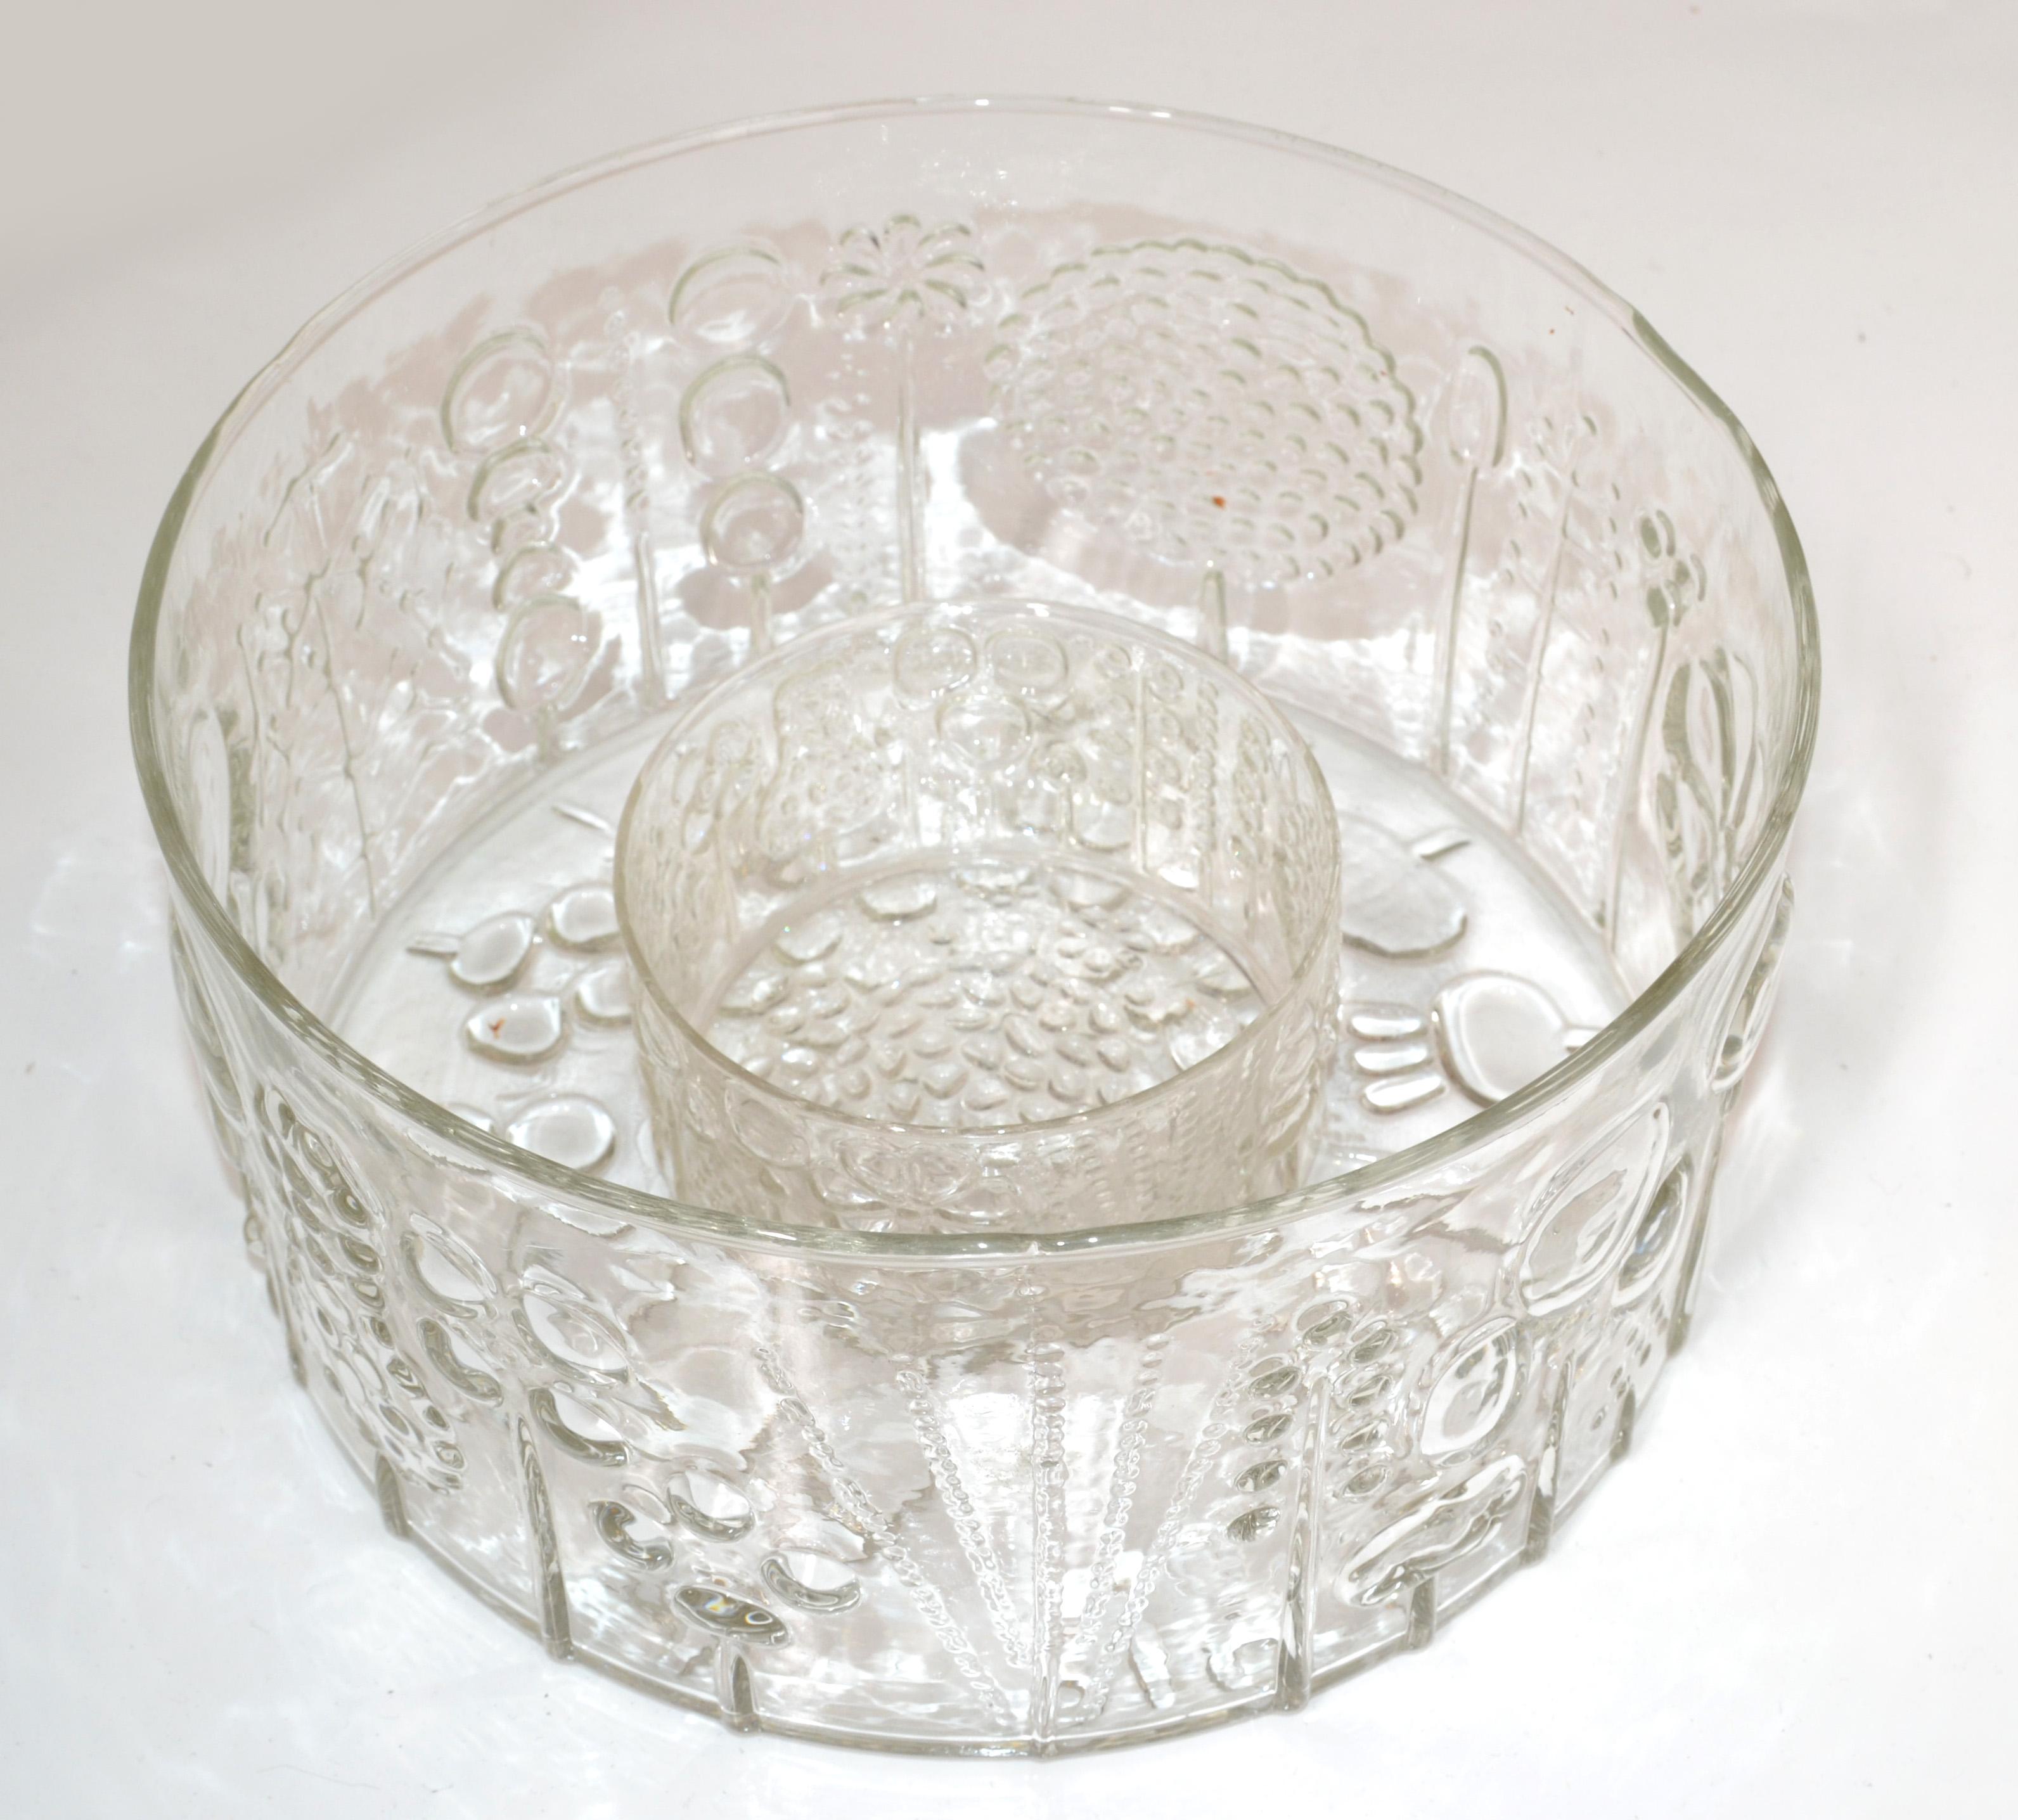 Iittala Scandinavian Modern set of 2 Flora glass bowl, salza serving bowls designed by Oiva Toikka and Nuutajärvi Notsjõ.
This is the larger Size of the serving bowl, and it comes with the small center bowl.
Smaller art glass bowl measures: